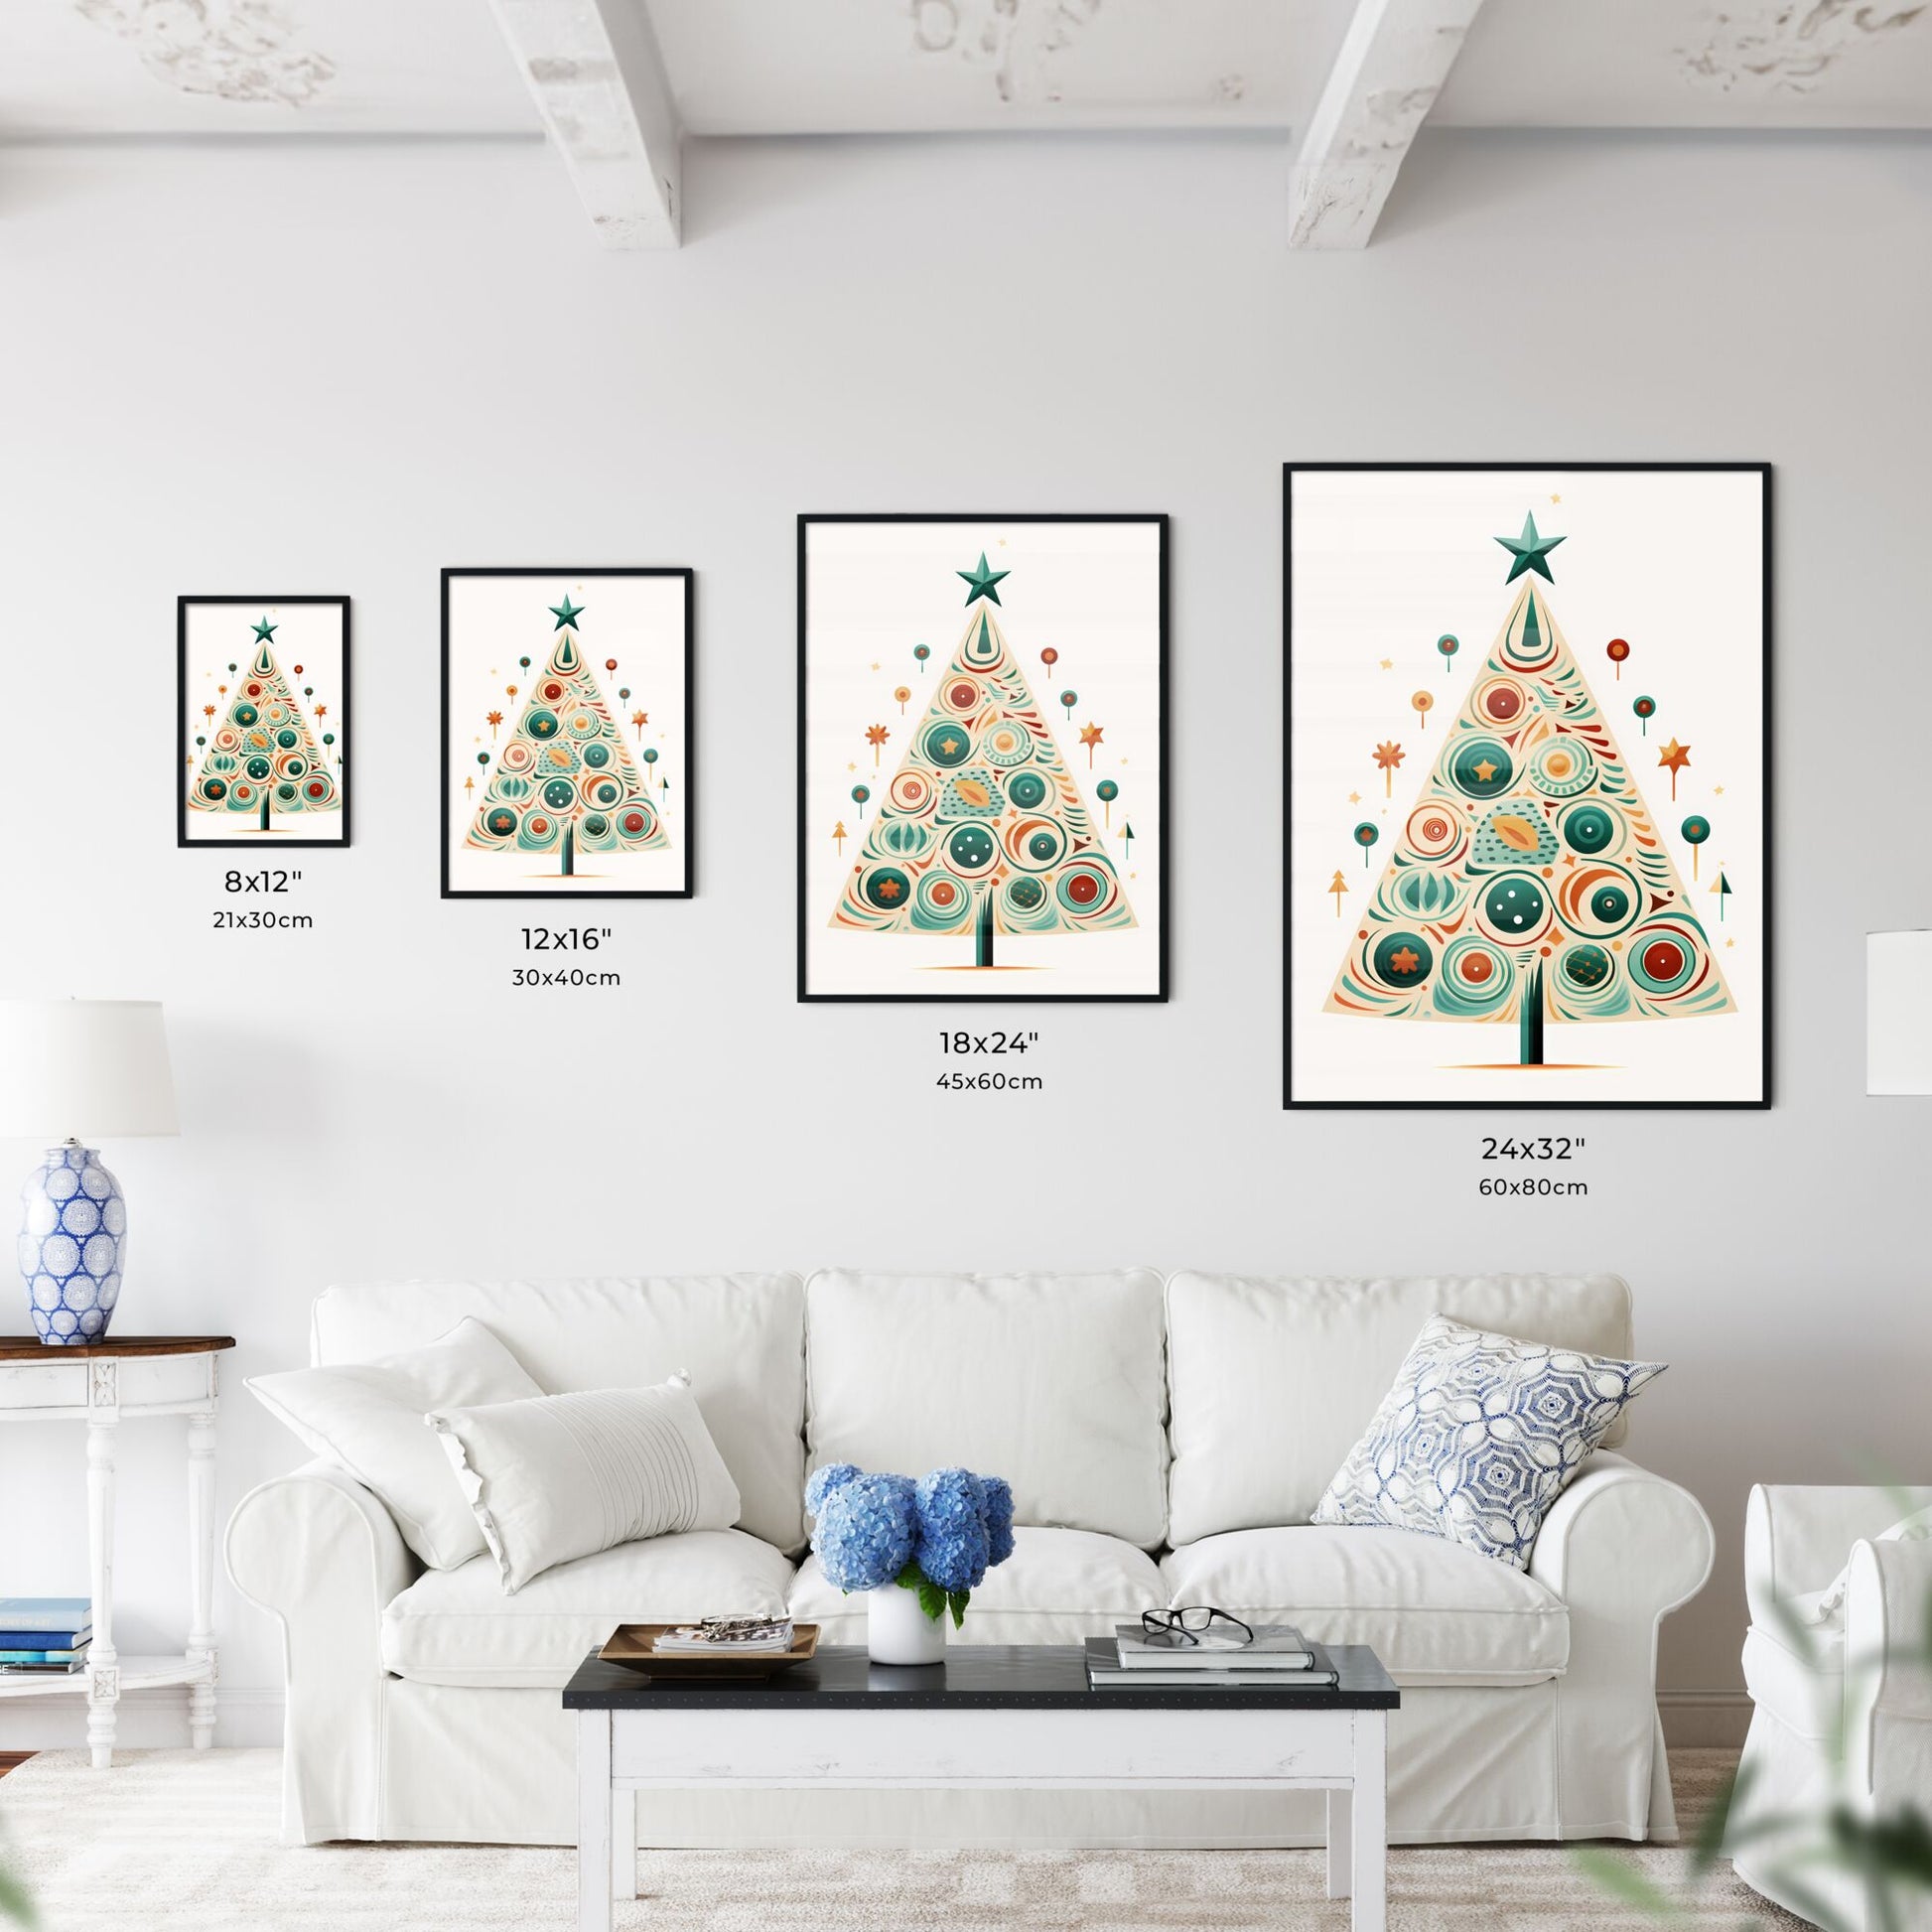 Christmas Tree With A Star Art Print Default Title